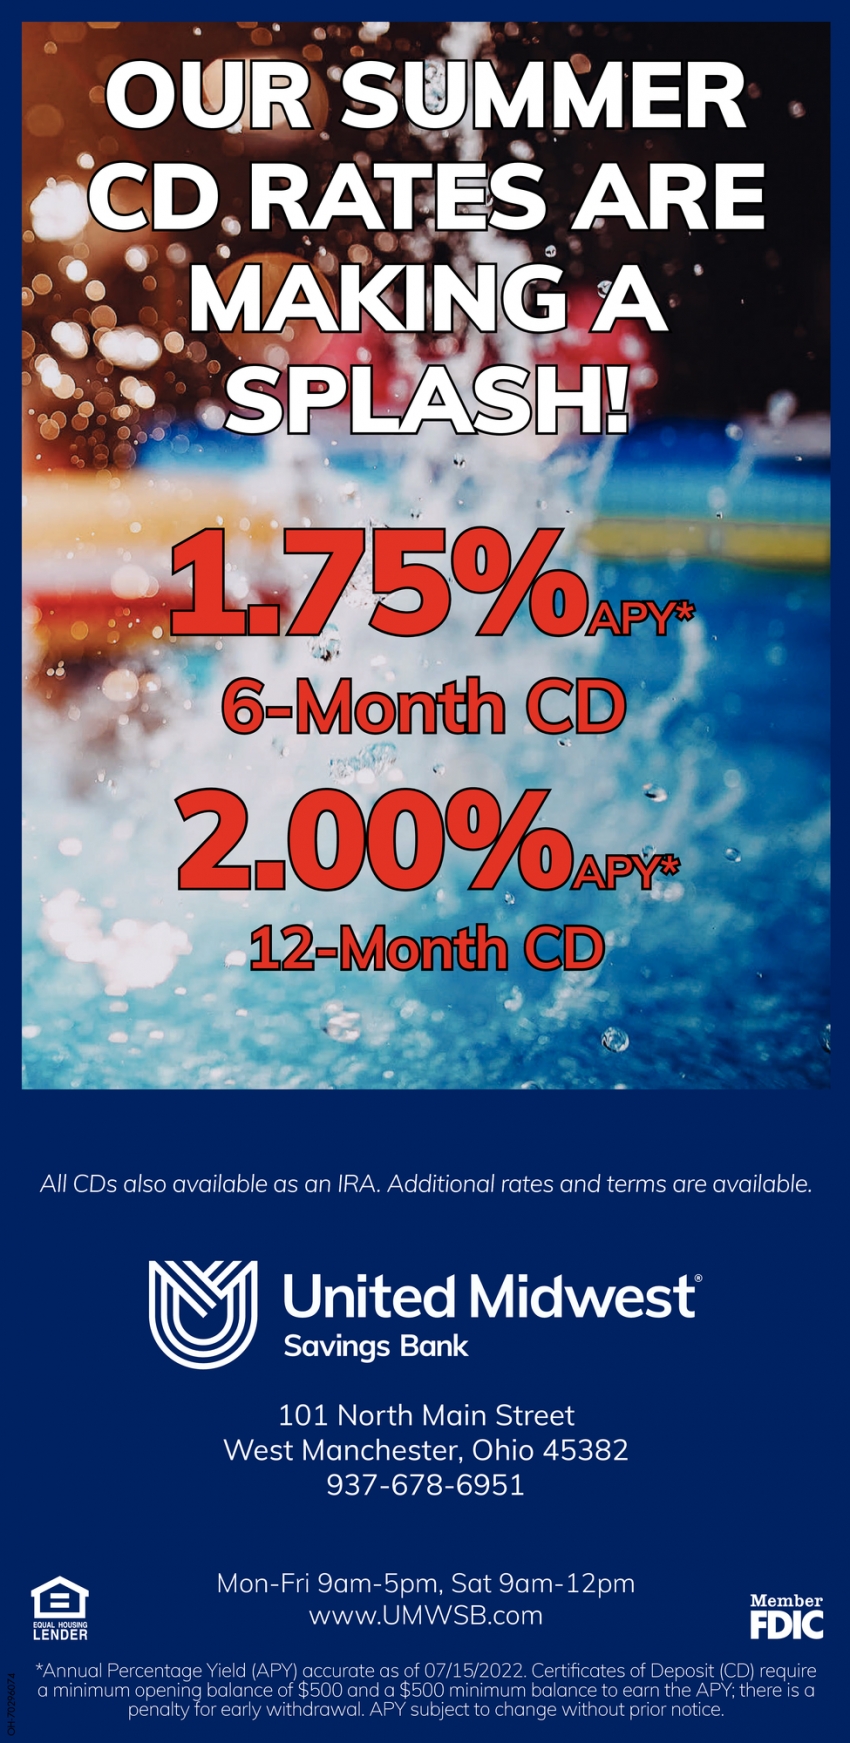 Our Summer CD Rates Are Making Splash